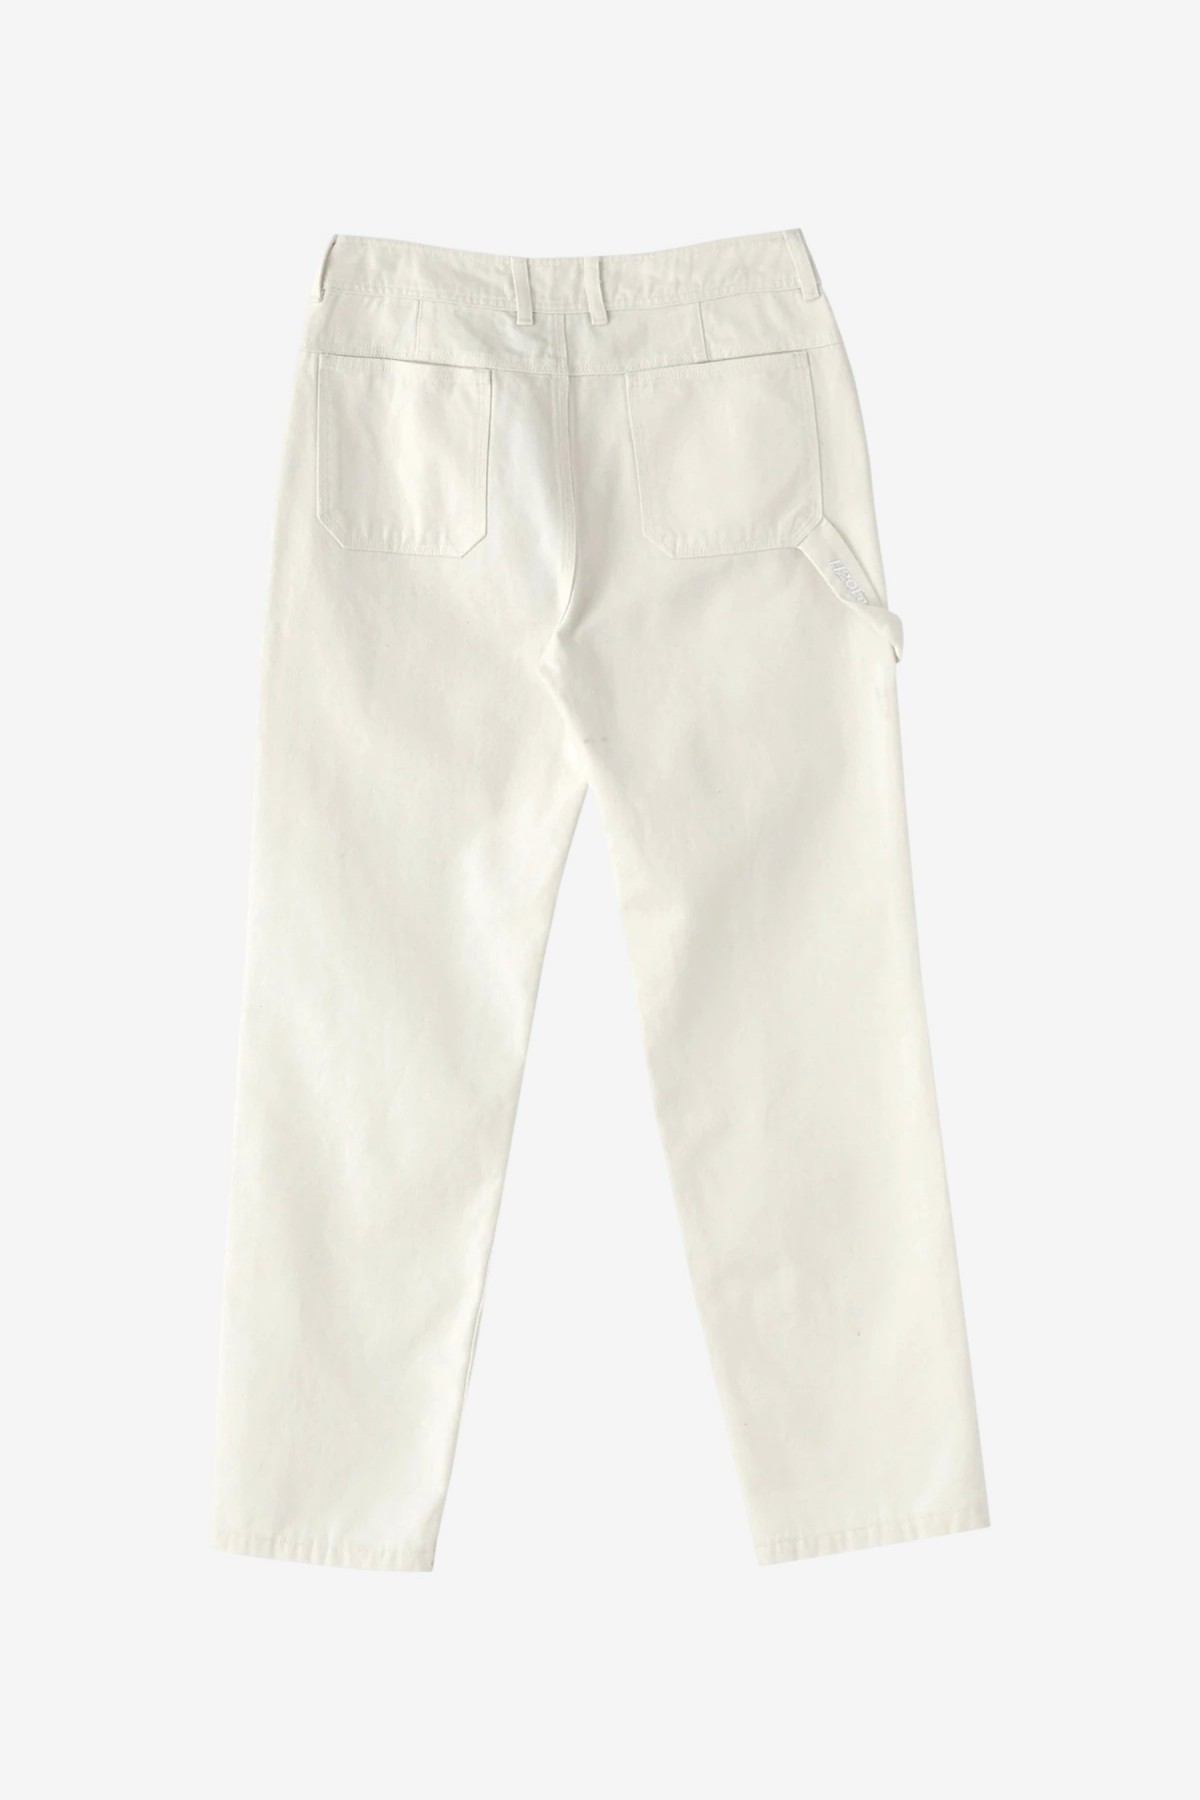 H2OFagerholt Love In Amsterdam Pants in Off White